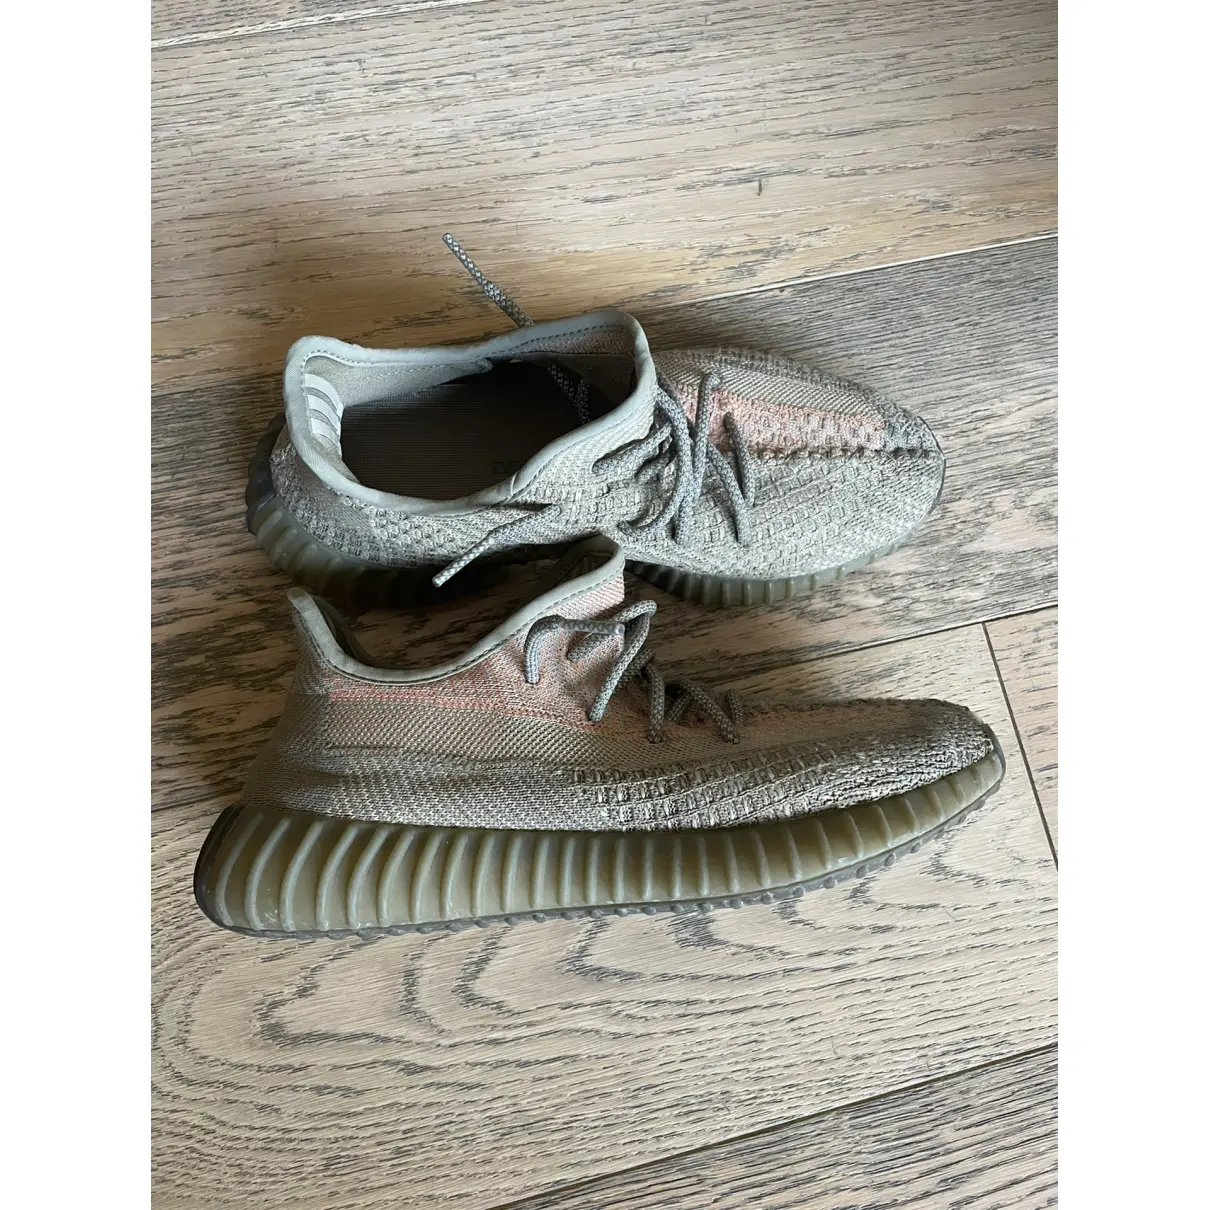 Buy Yeezy x Adidas Boost 350 V2 cloth low trainers online